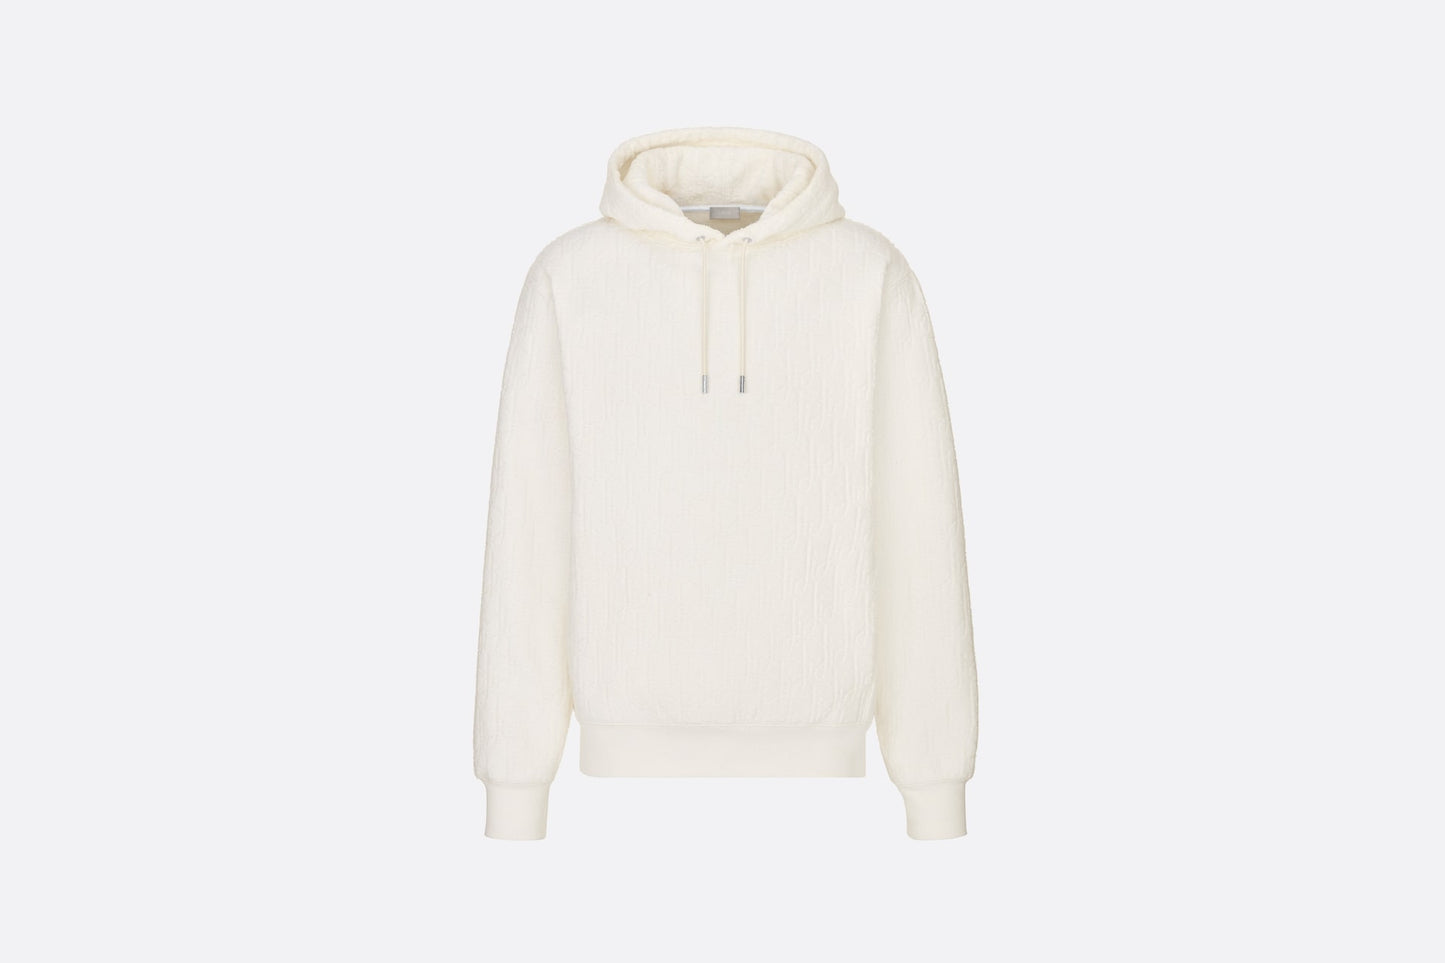 Dior Dior Oblique Hooded Sweatshirt Relaxed Fit White Cream